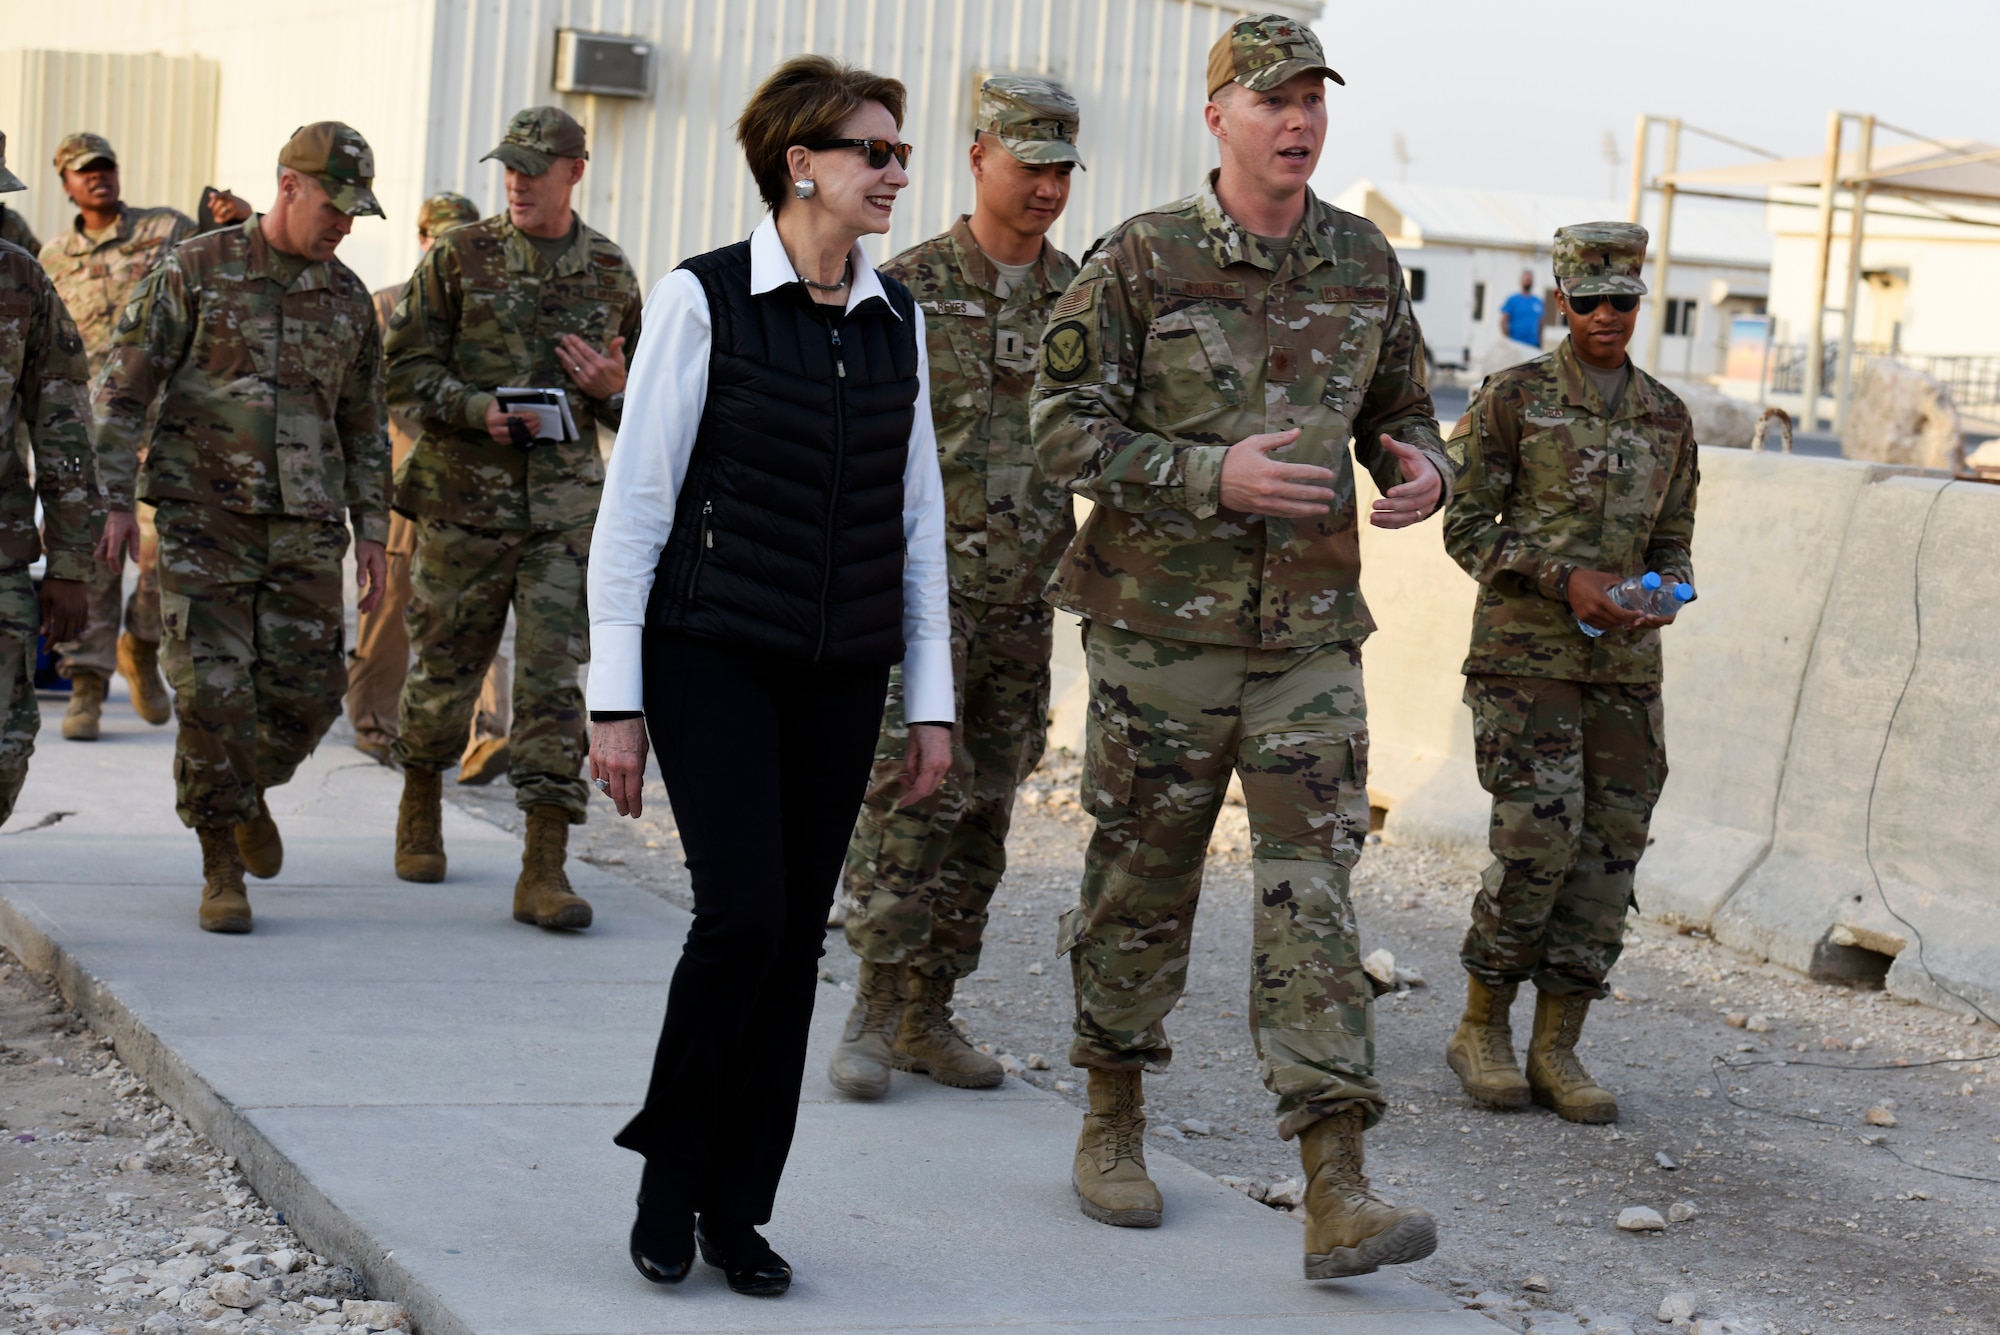 Secretary of the Air Force Barbara Barrett speaks with Maj. Logan Jergens, 379th Expeditionary Force Support Squadron, during a walking tour at Al Udeid Air Base, Qatar on Nov. 17, 2019. During their first overseas trip, Barrett and Air Force Chief of Staff Gen. David L. Goldfein met with AUAB and Qatari leadership, held an all-call where they spoke to readiness, lethality and the future of the U.S. Air Force and visited Airmen and the facilities where they work and live. (U.S. Air Force photo by Tech. Sgt. Ian Dean)